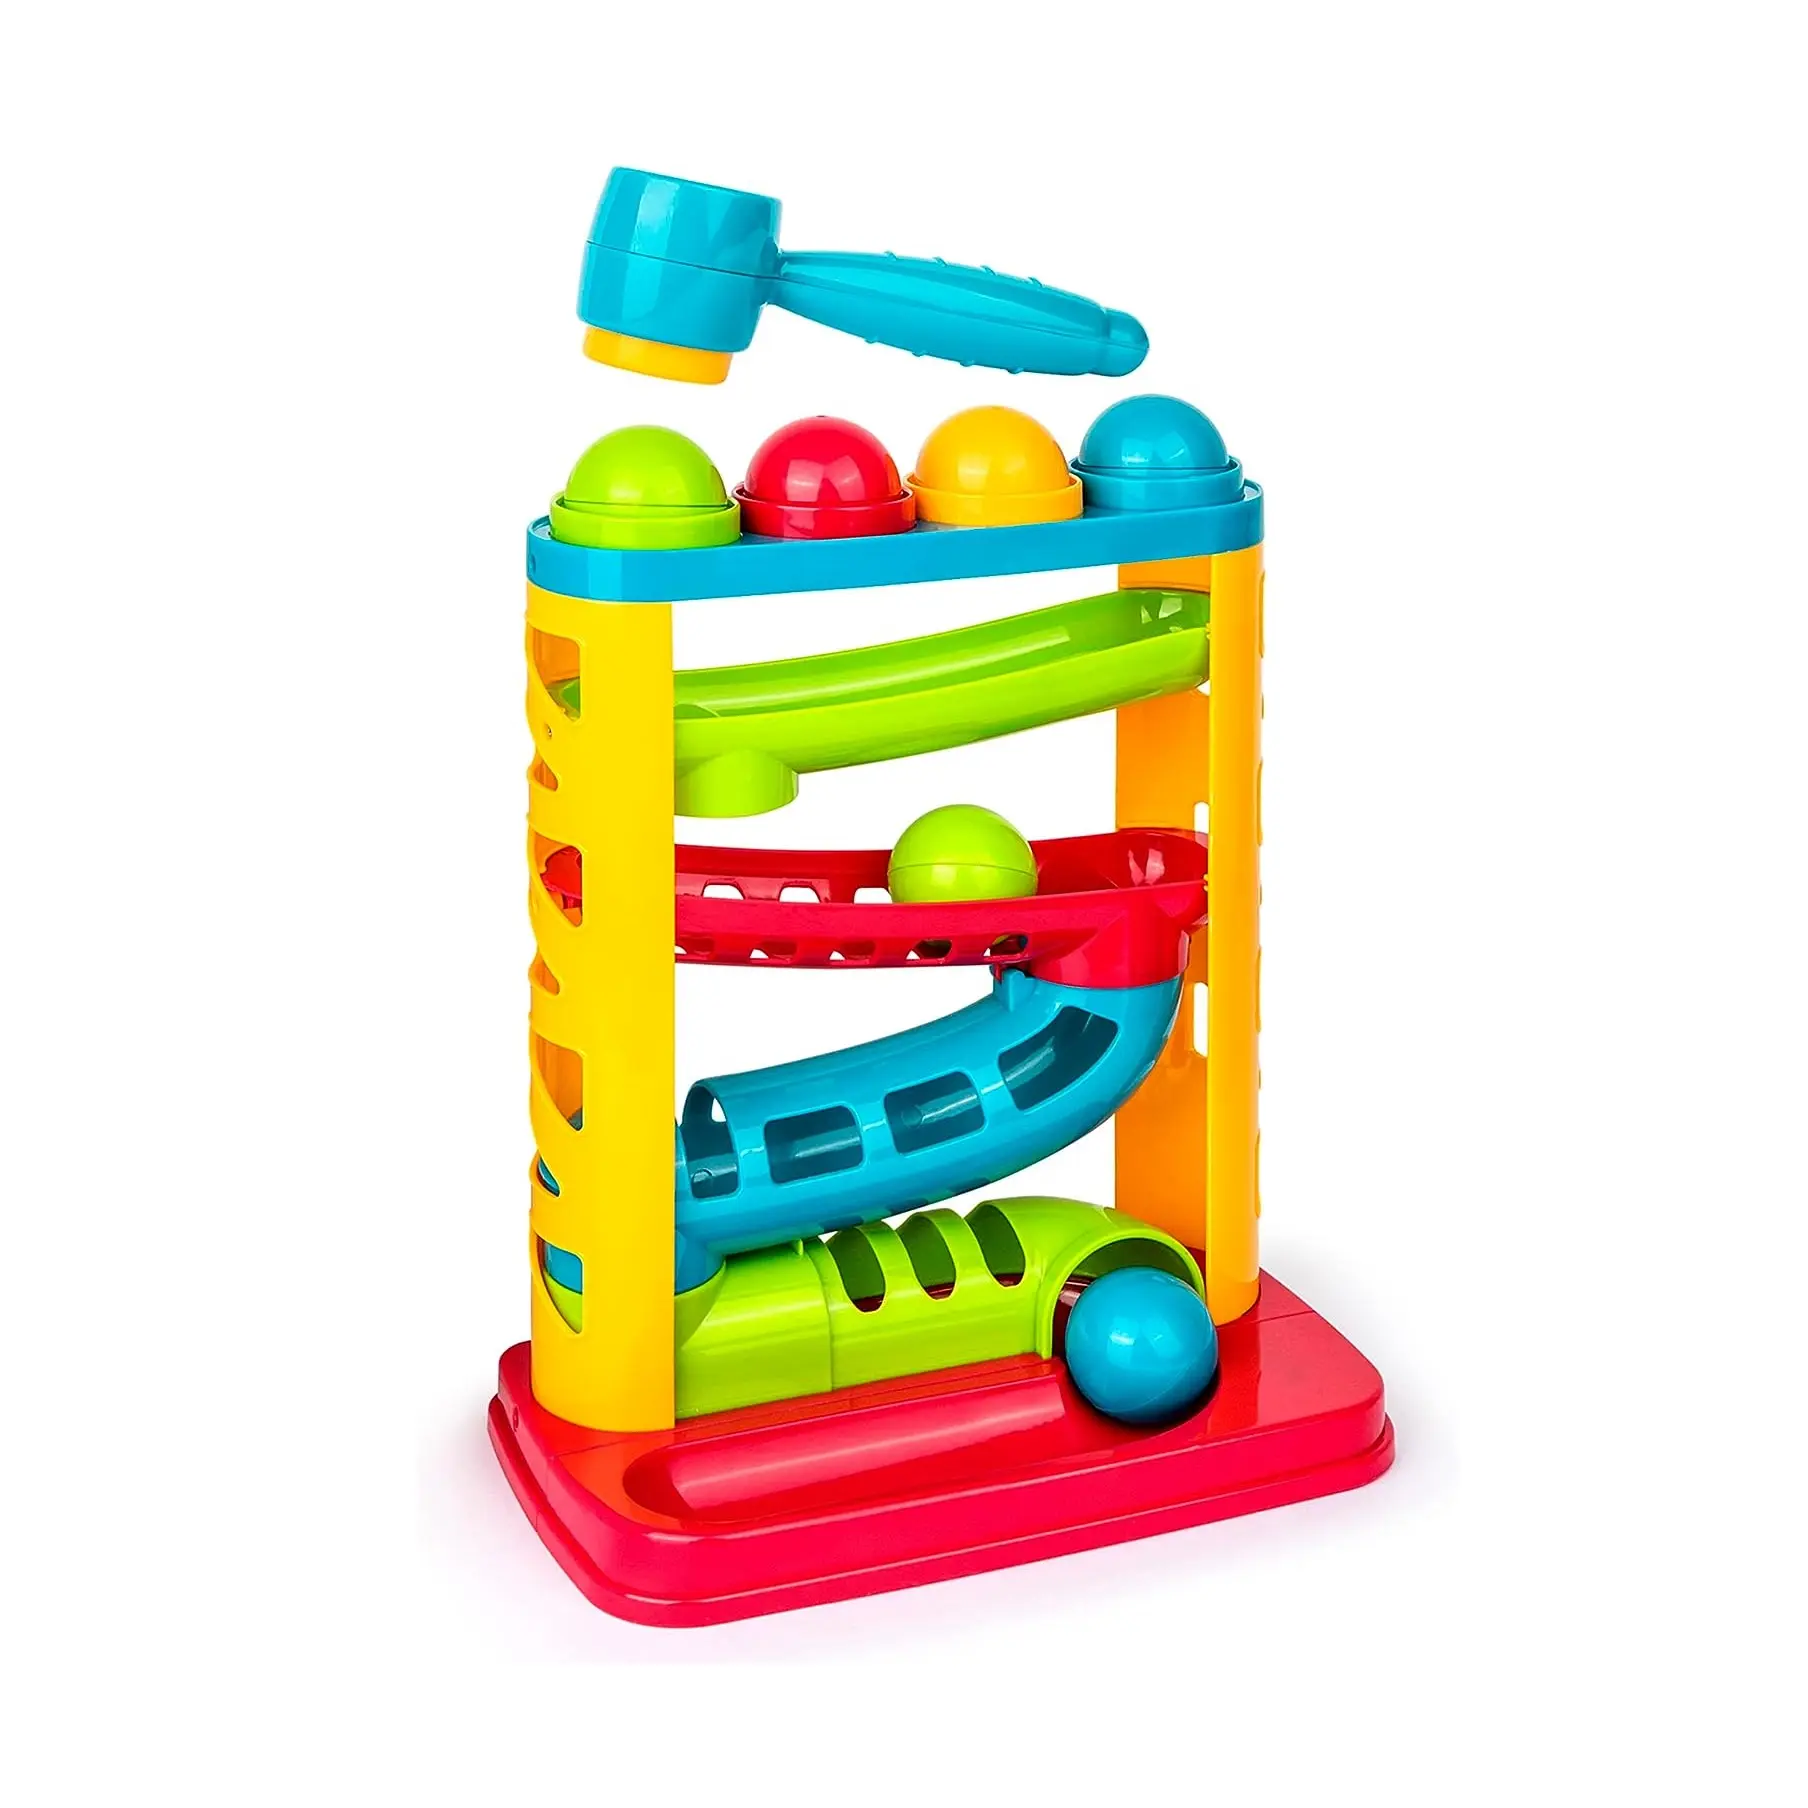 Top Rated Durable Pound A Ball Toys for Toddler Stacking and Learning Toys for Kids at Wholesale Prices from US